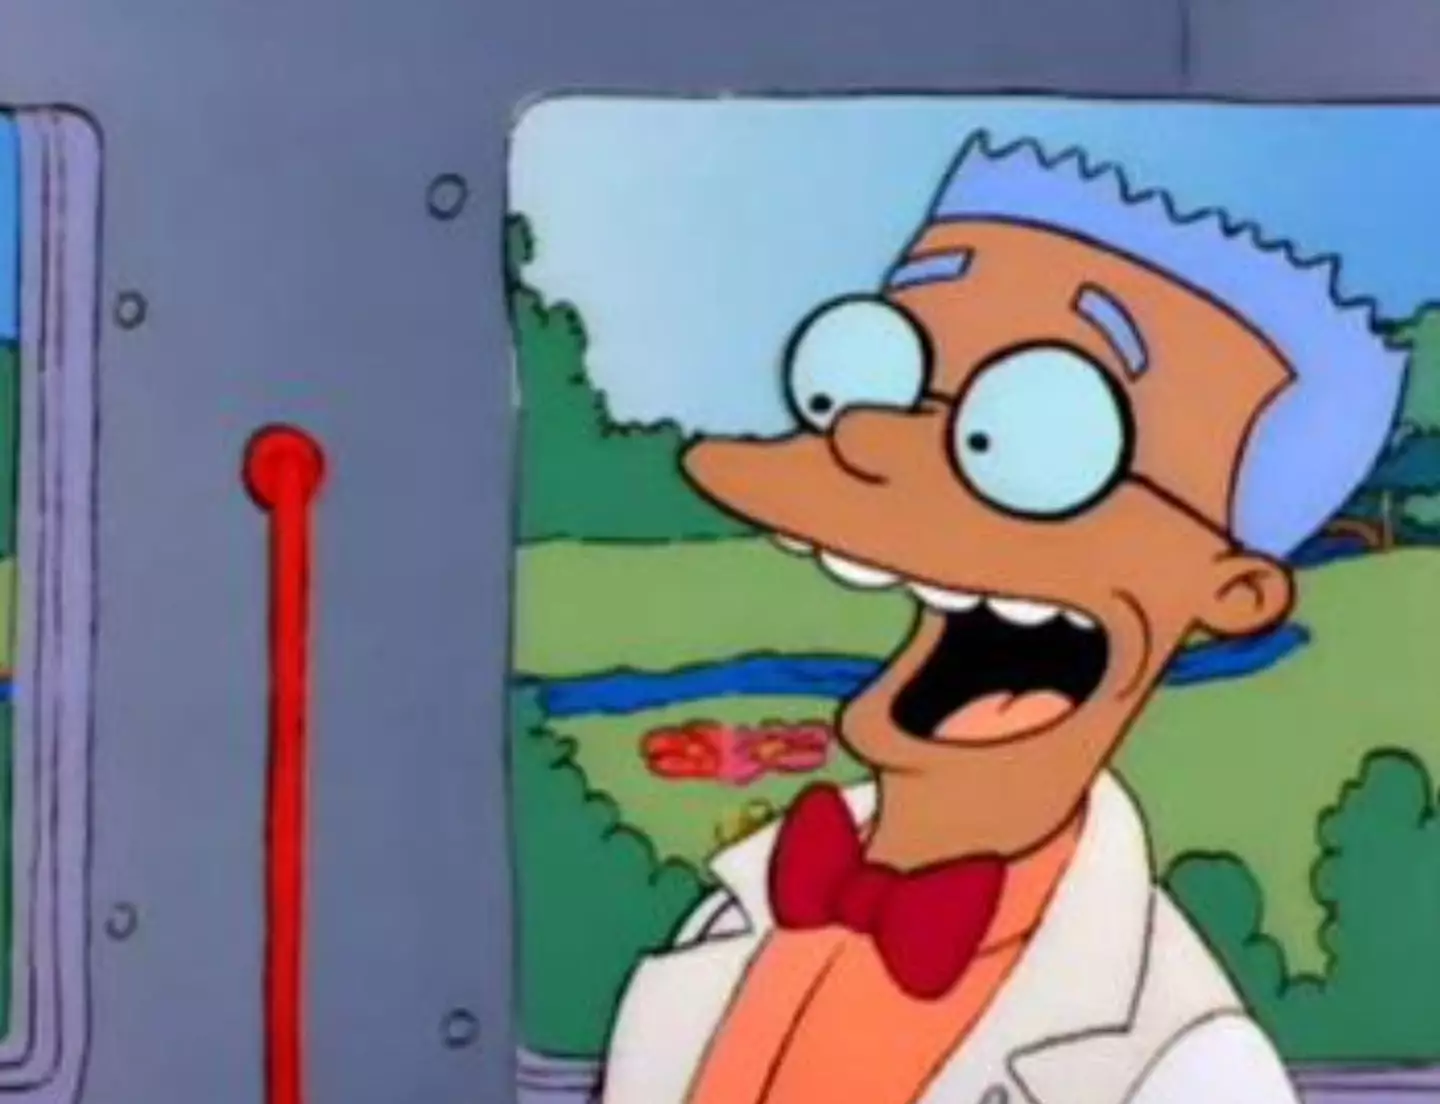 Smithers was Black in one episode of the series.